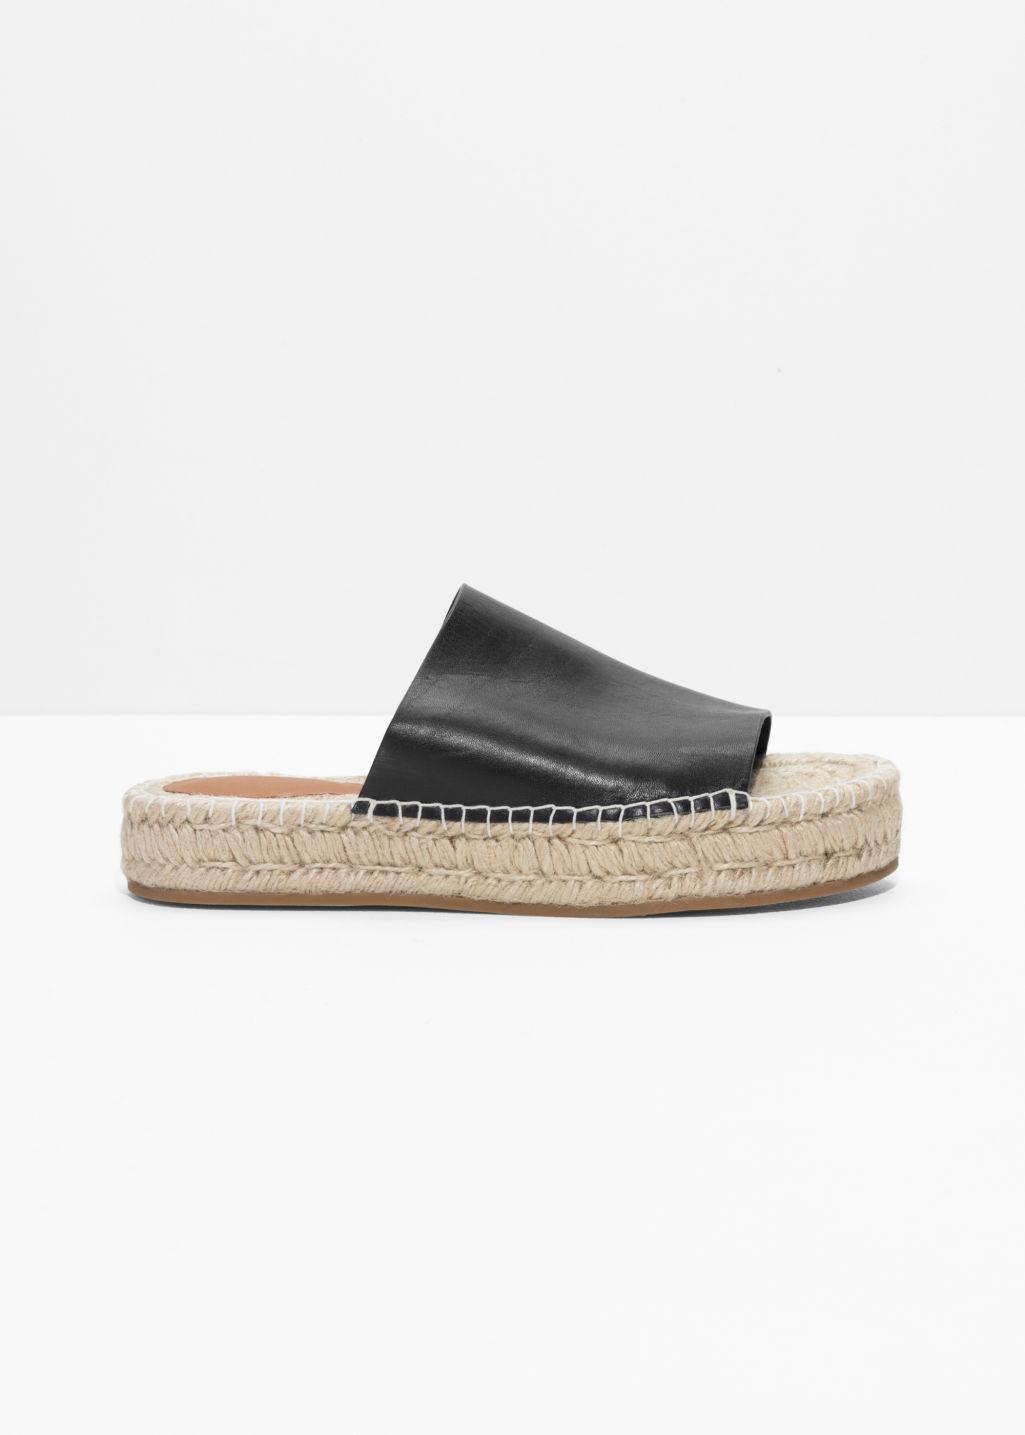 & Other Stories Leather Slipper Espadrilles in Black - Lyst